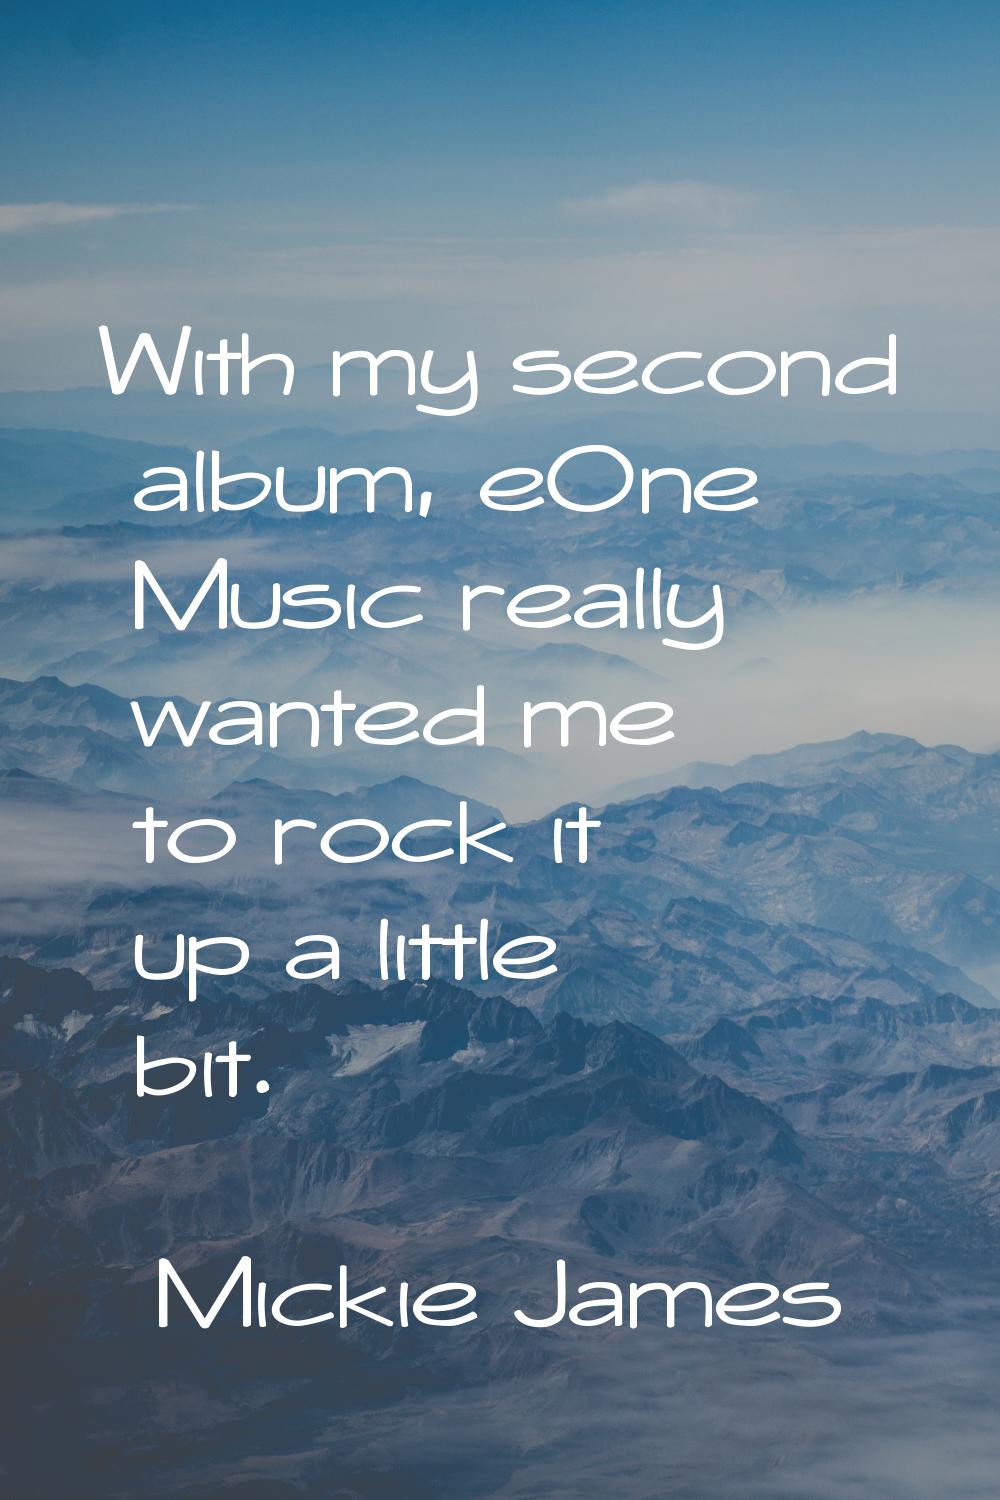 With my second album, eOne Music really wanted me to rock it up a little bit.